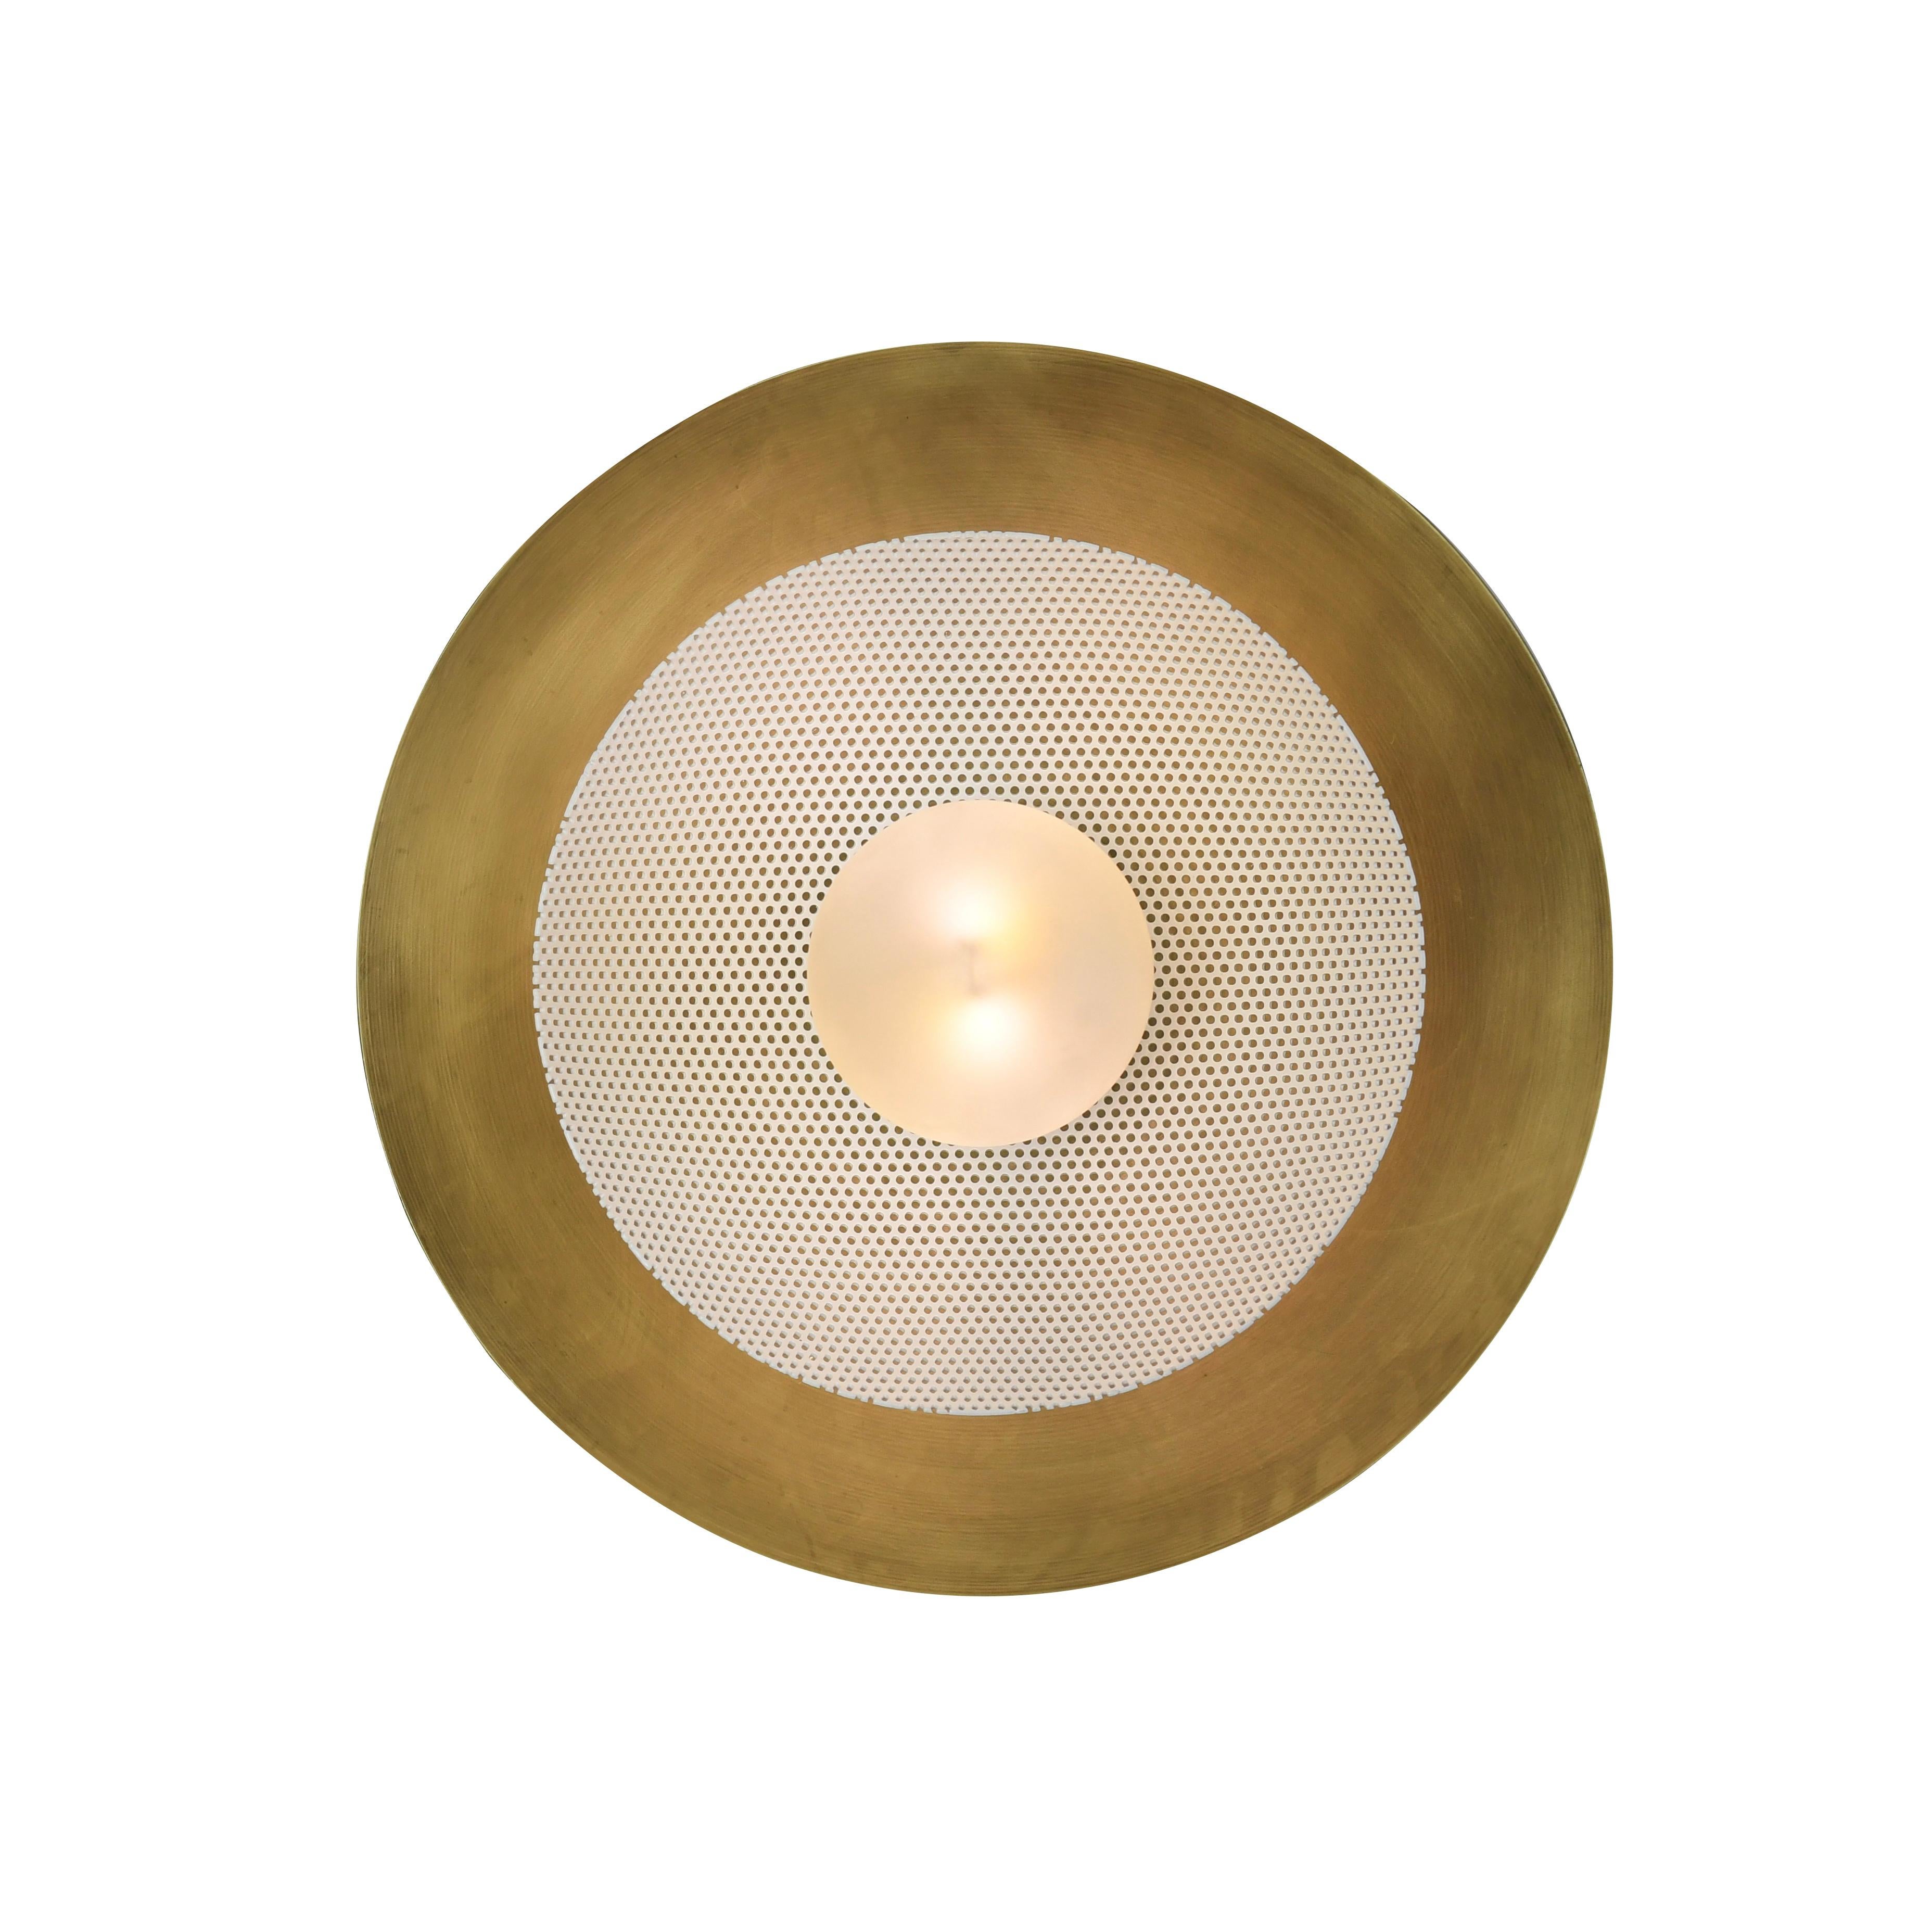 The Centric wall sconce is a stately take on French modernism, featuring a spun metal mesh shade nestled into a large solid brass bowl. Part of our Axial family of products, the Centric wall sconce is a substantial, handsome piece that works well in